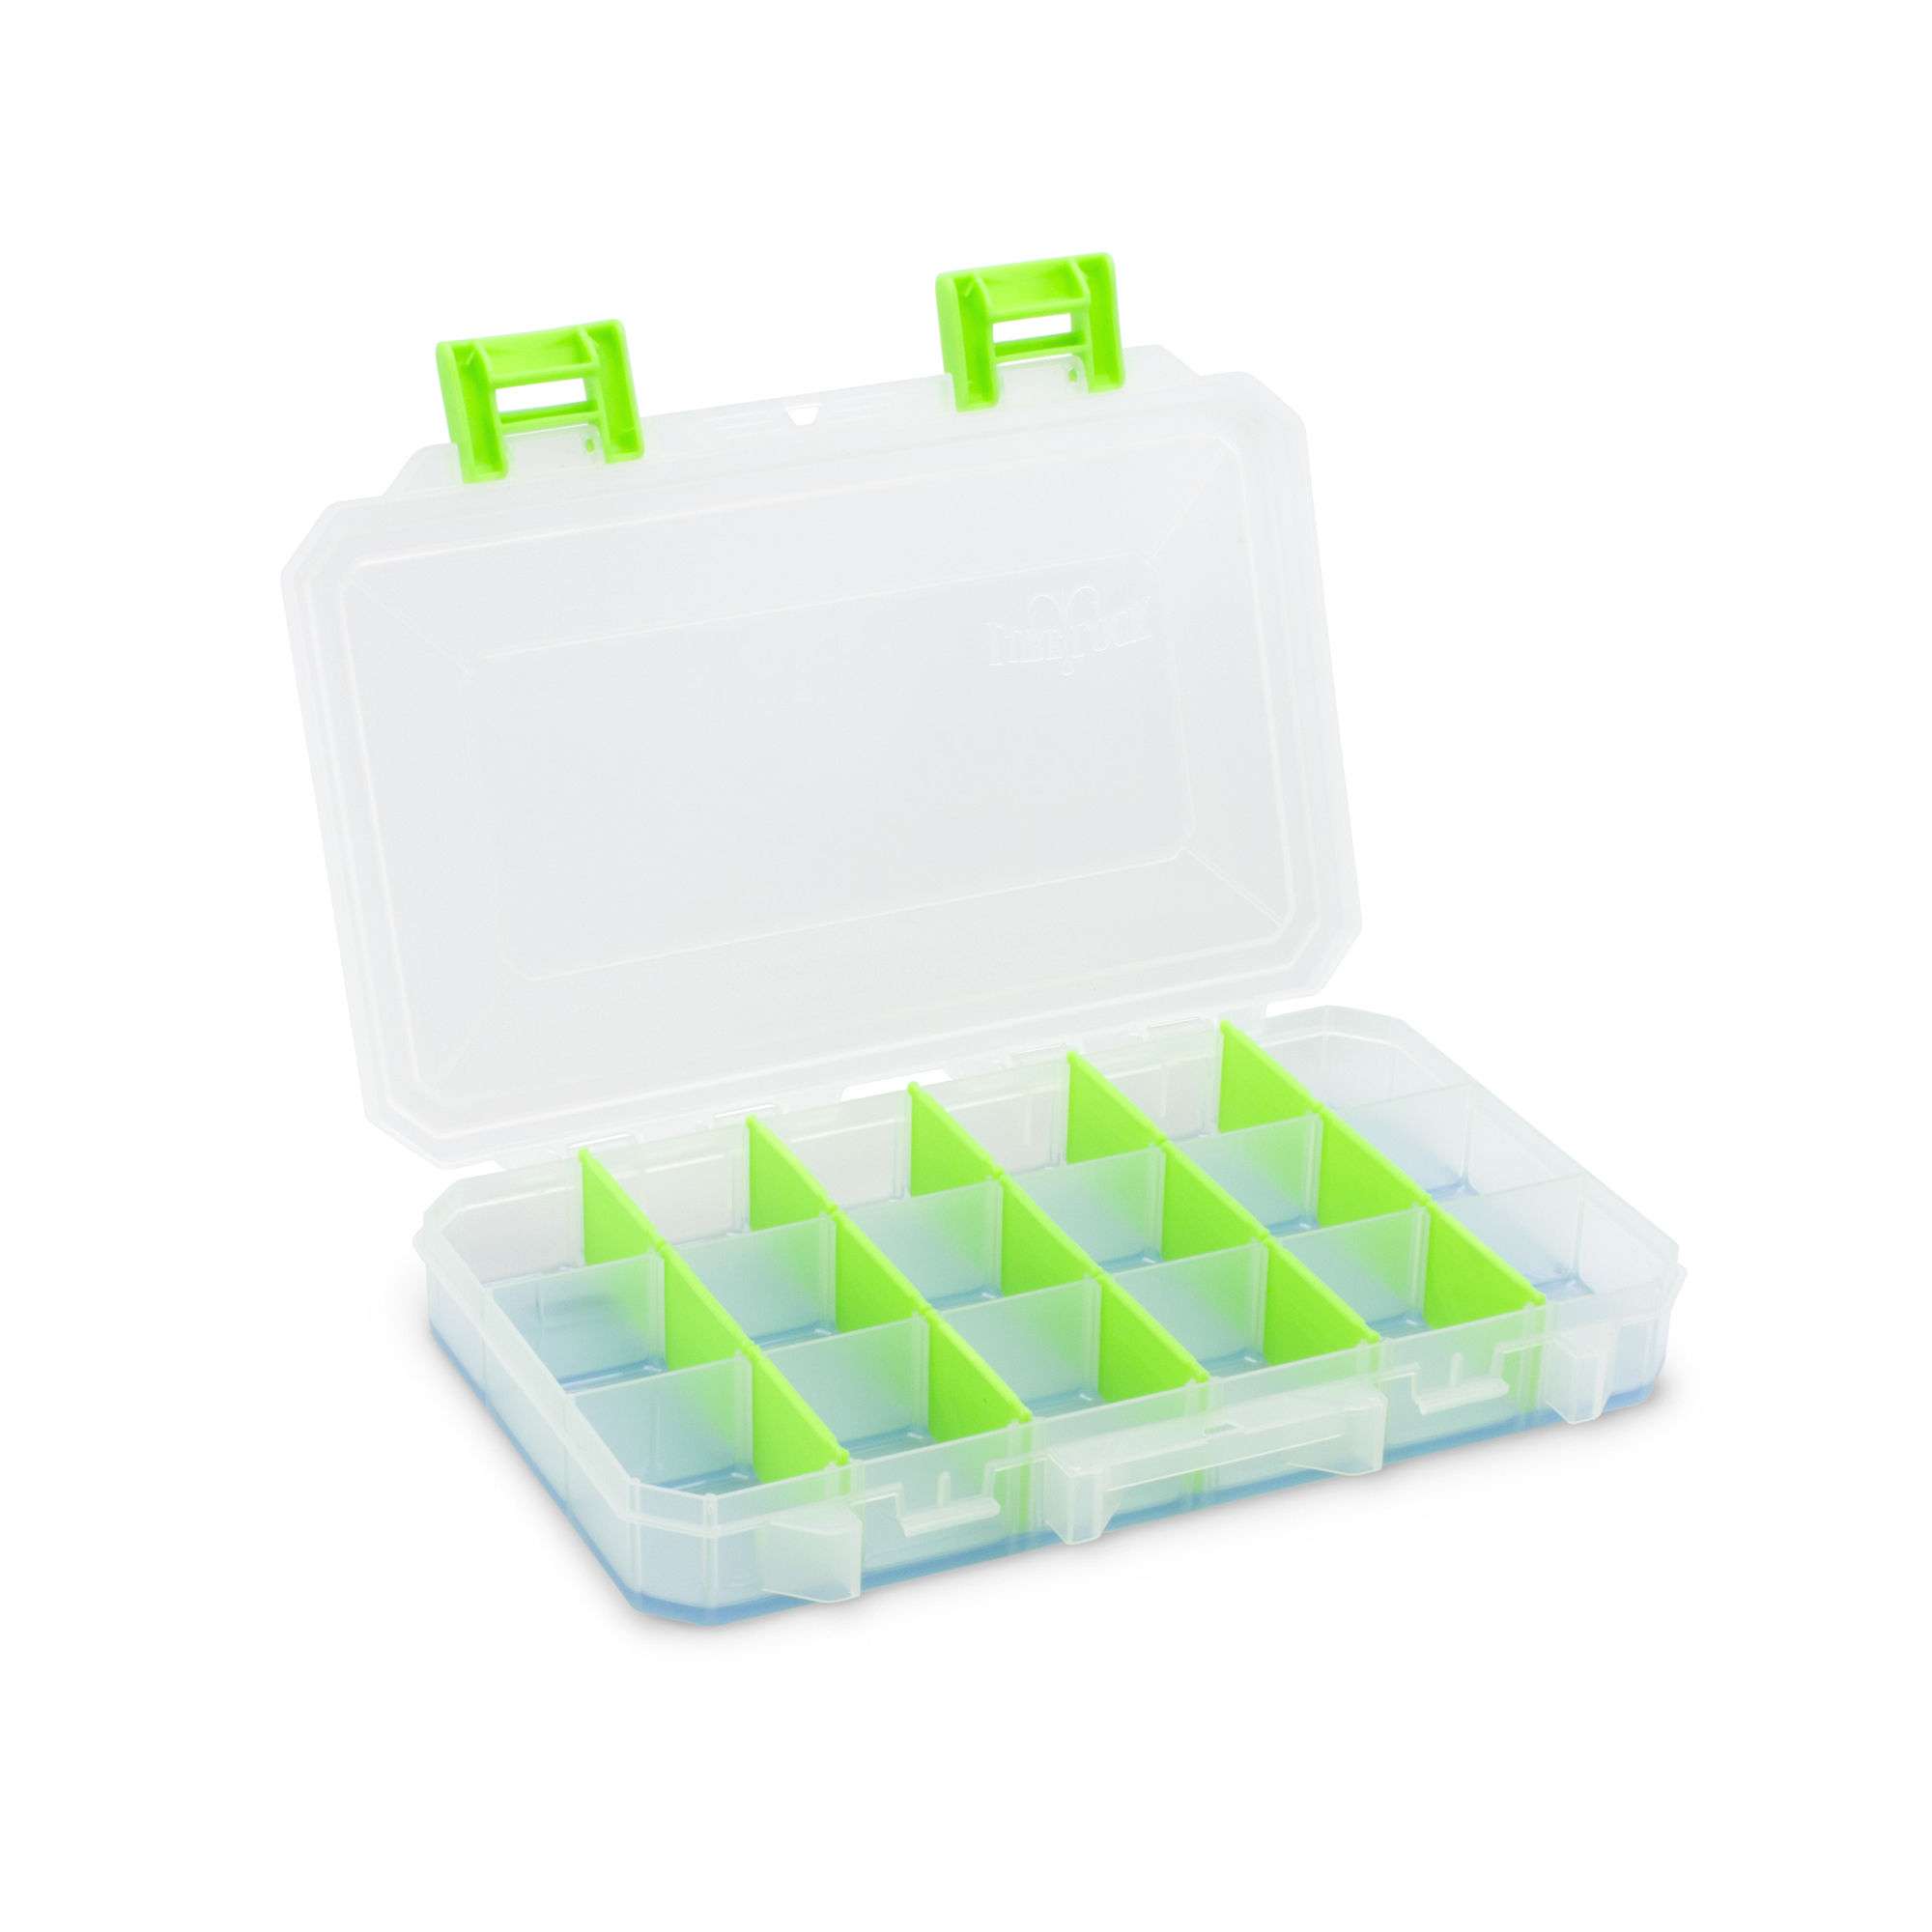 Lure Lock Tackle Boxes with ElasTak<br>
Lure Lock<br>
$15.99, $17.99 and $19.99<br>	
Lure Lock has taken the standard plastic utility box and placed its proprietary ElasTak gel into the bottom of the trays which secures terminal tackle and protects baits and lures.  The Lure Lock system is simple to use â just place your tackle on the ElasTak gel and it will remain secure and in place. Even when the Lure Lock boxes are turned upside down or shaken, the tackle stays perfectly in place.  Each case is constructed in the USA of heavy duty clear and pure polypropylene plastic and features easy-to-open green latches and comes with easy to snap-a-part dividers. Lure Lock boxes come in three sizes LL1, LL2 and LL3 and are available in variations featuring one to four cavities depending on the size box. 		